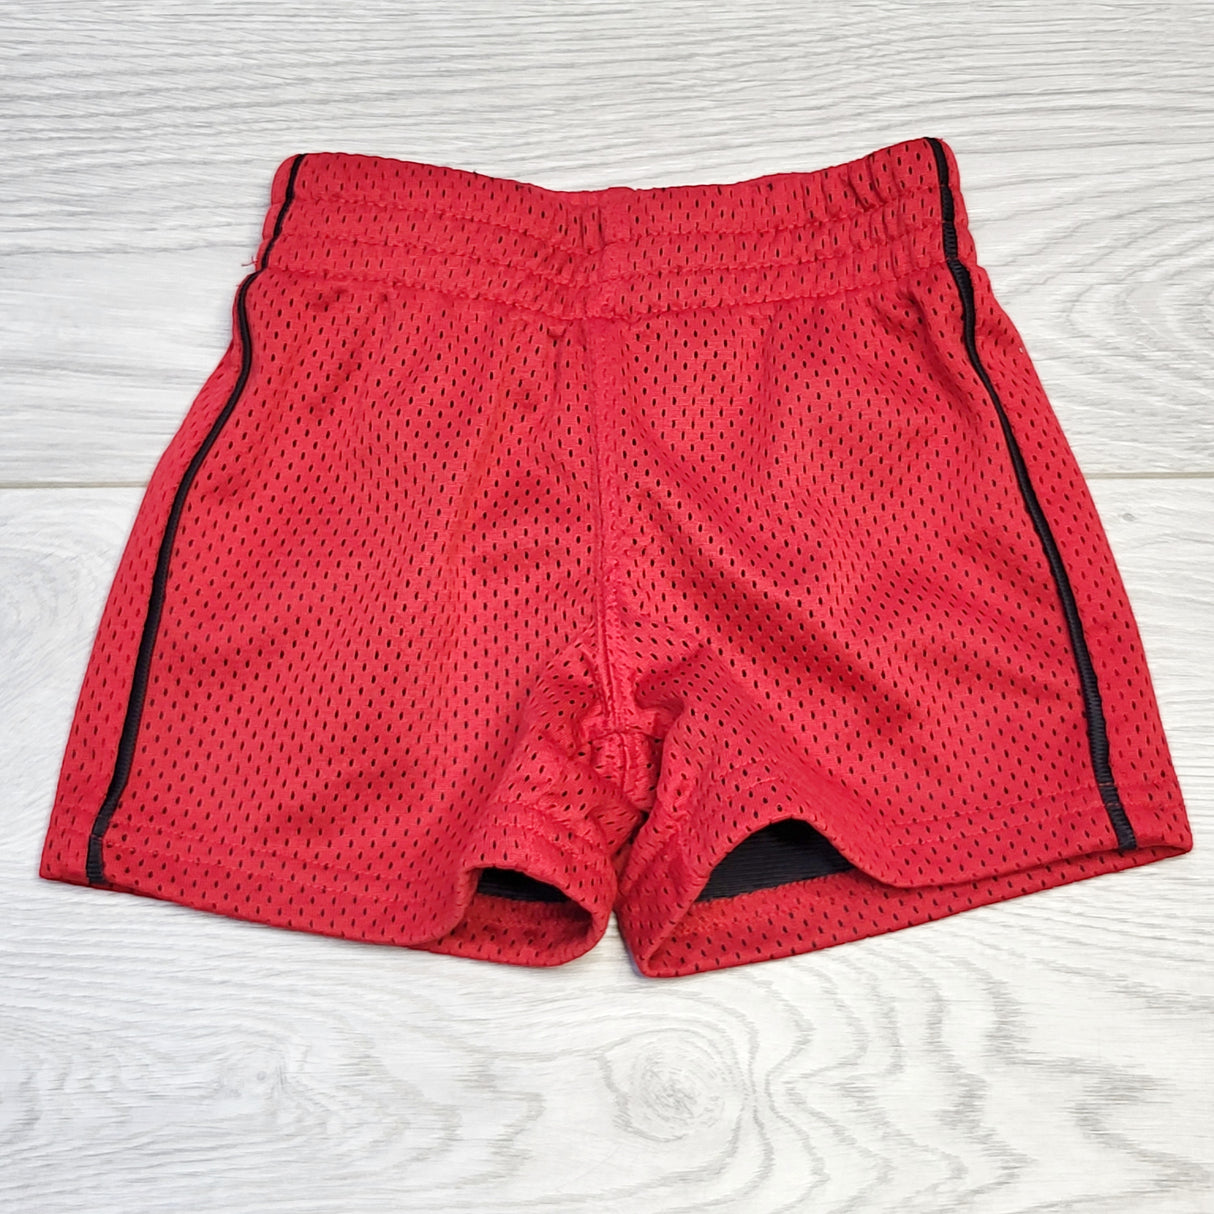 CHOL1 - George red active shorts, size 0-3 months